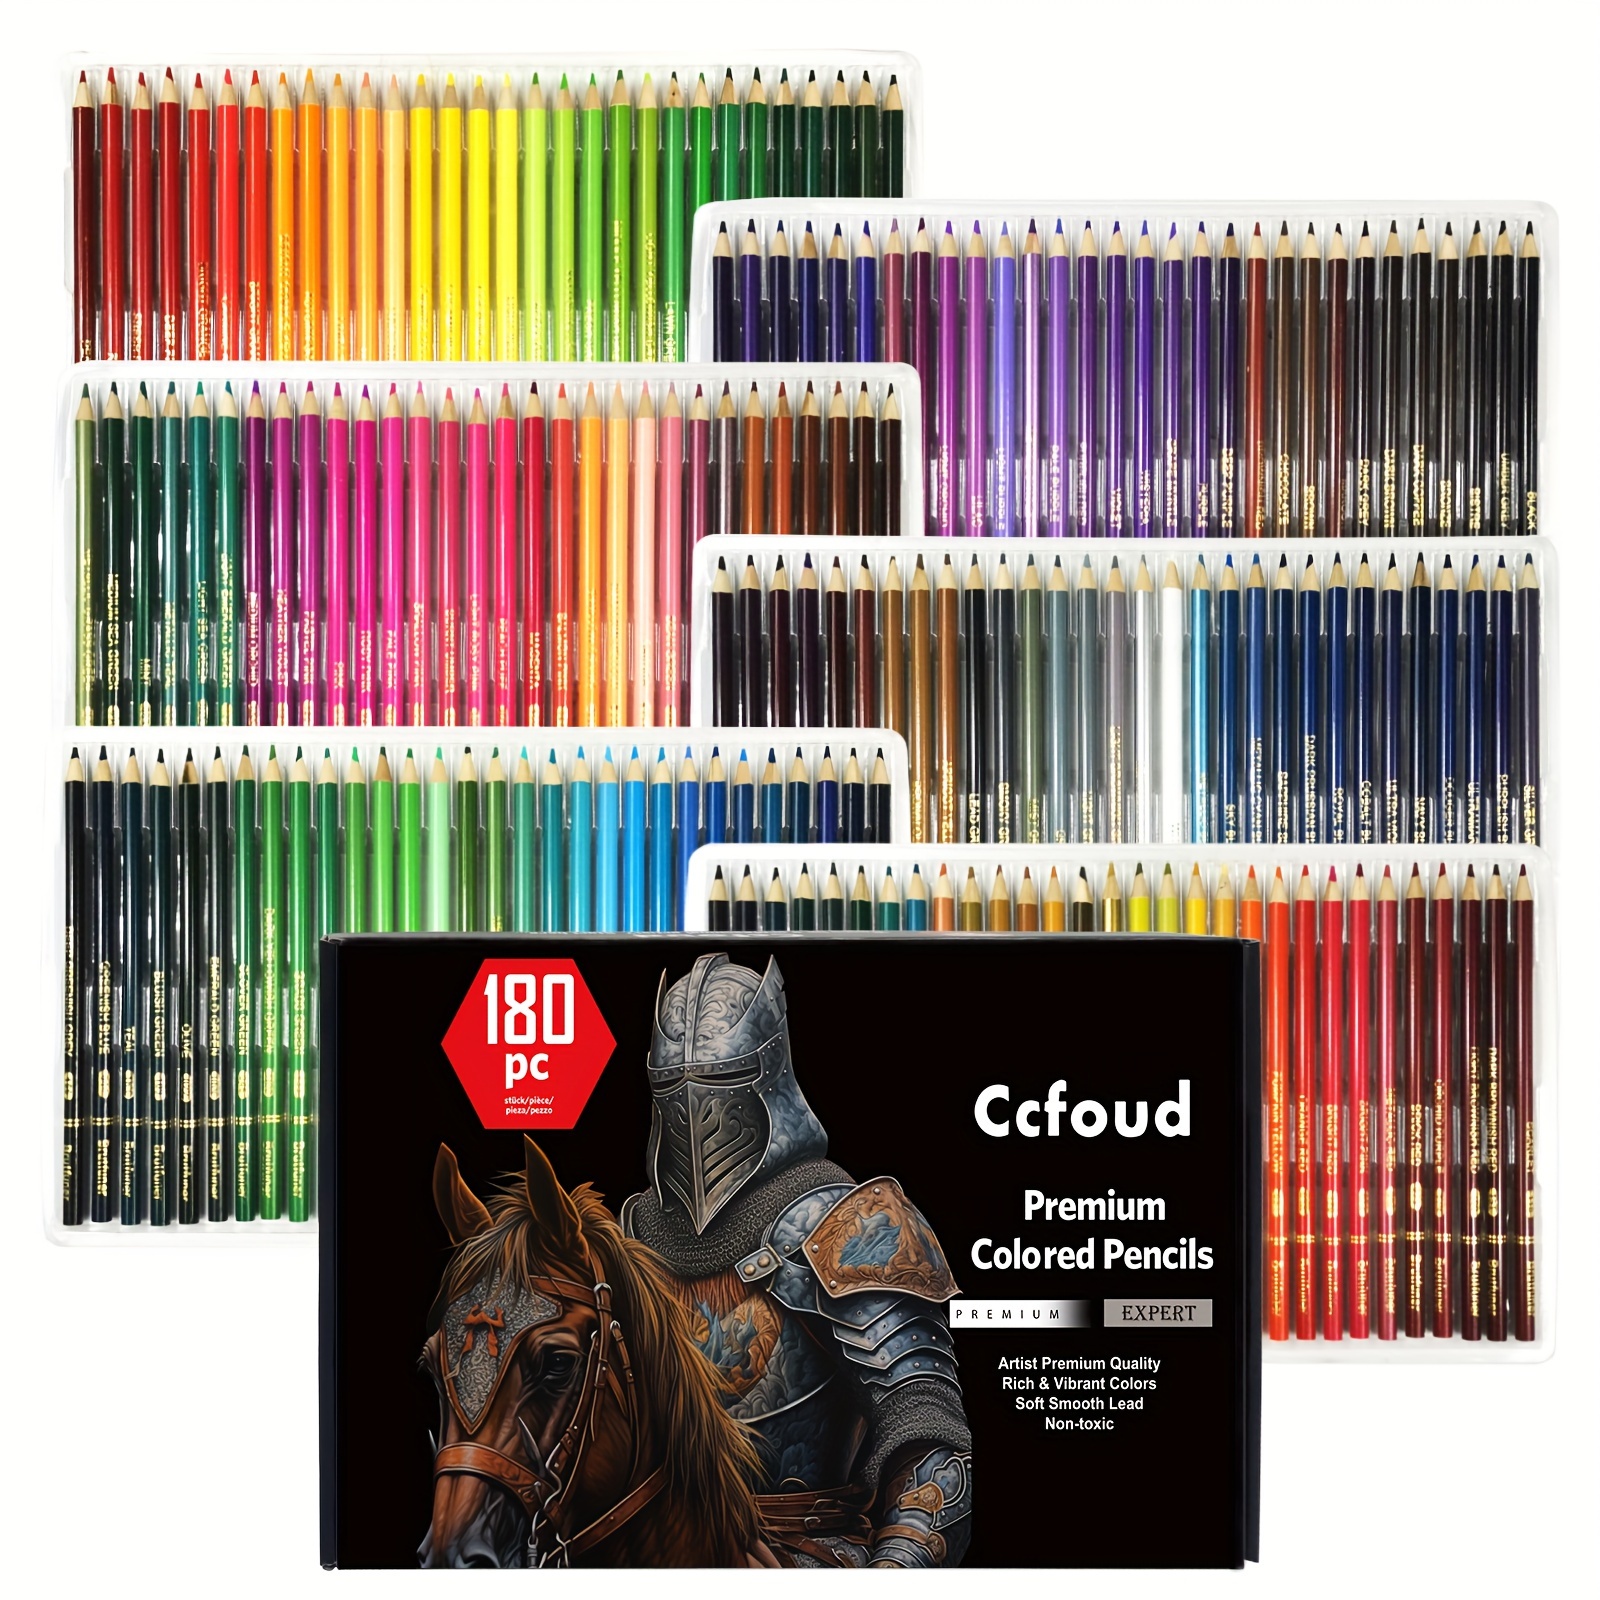 138 Colors Professional Colored Pencils, Shuttle Art Soft Core Coloring Pencils  Set with 1 Coloring Book,1 Sketch Pad, 4 Sharpener, 2 Pencil Extender, for  Artists Kids Adults Coloring 